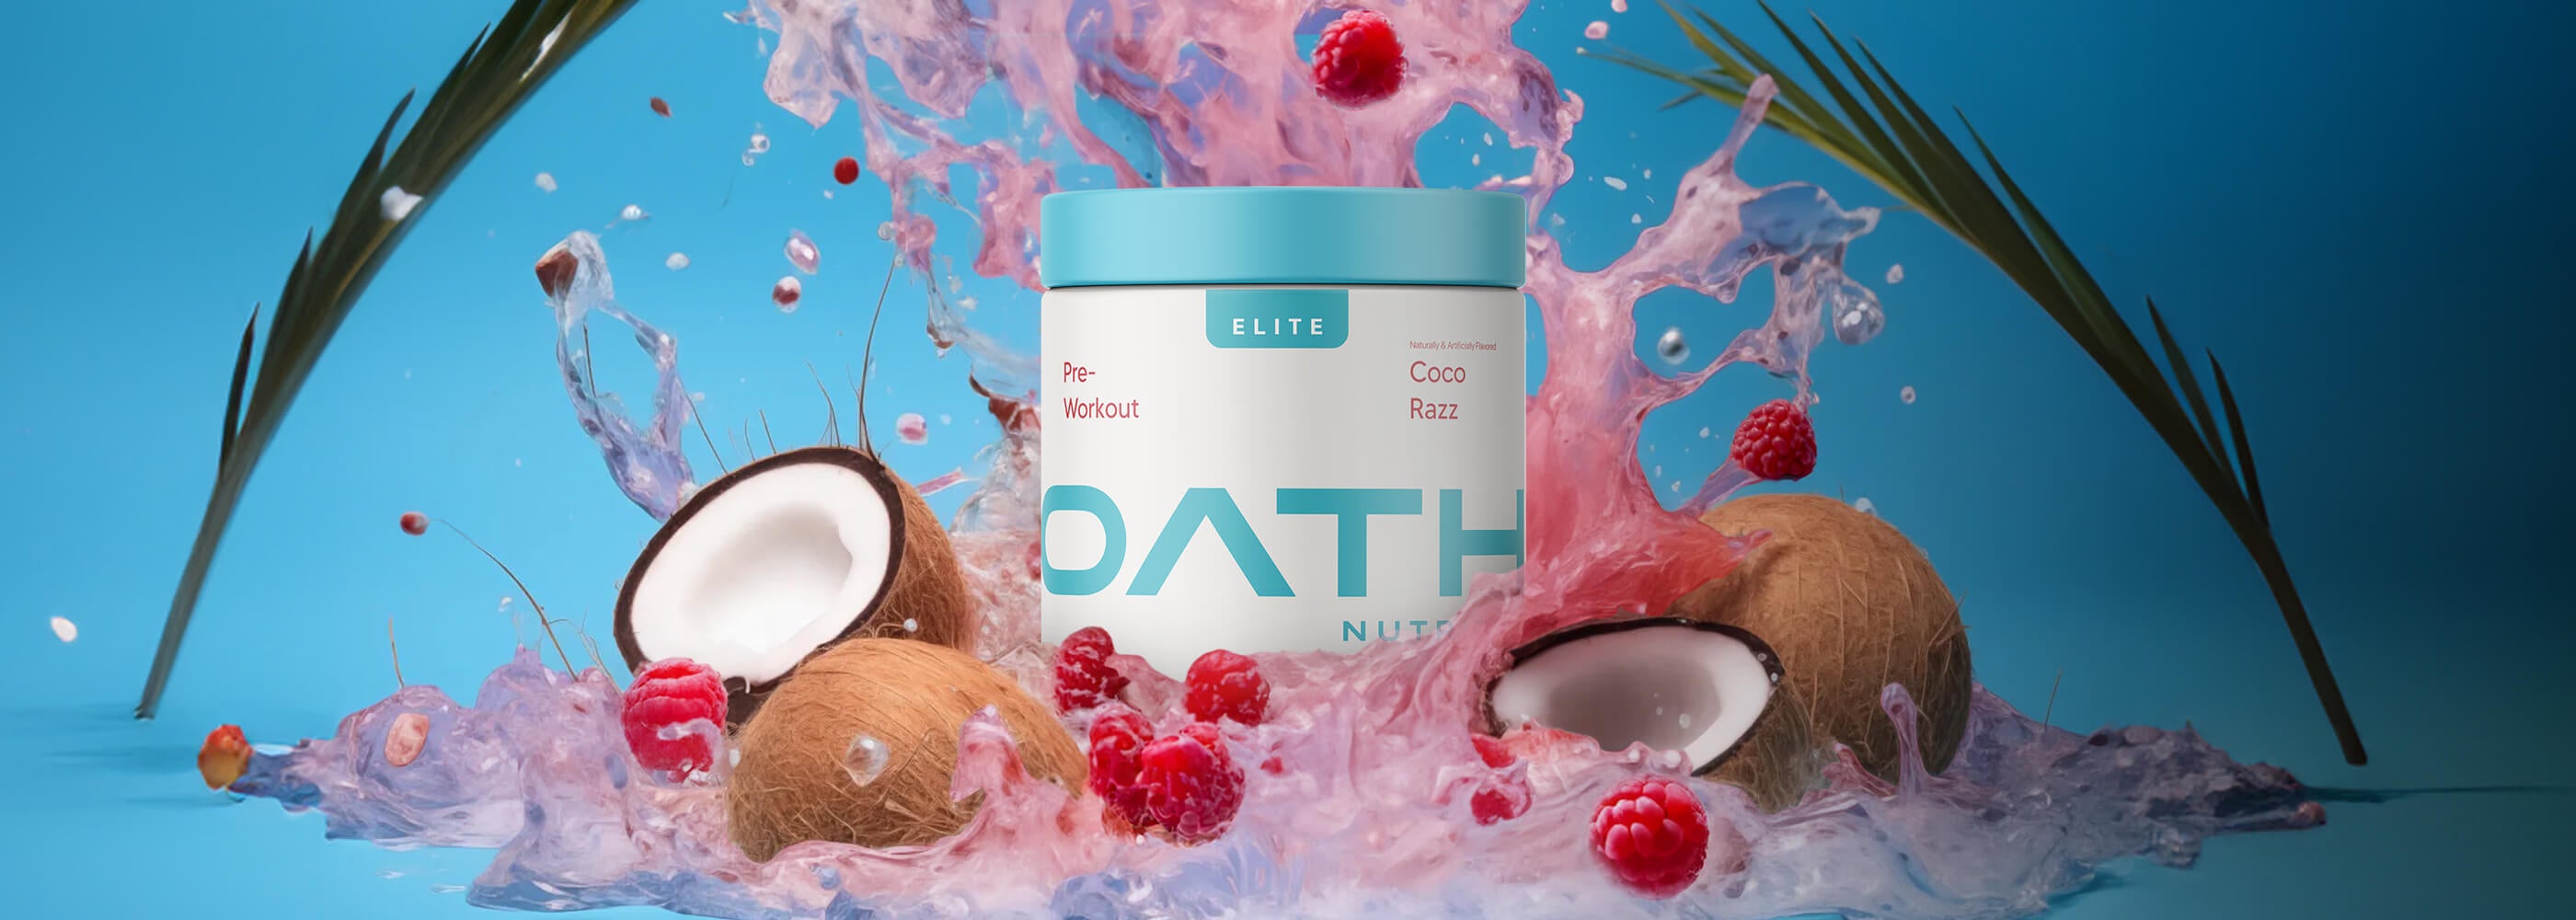 Oath Elite Pre-Workout - Coco Razz container with raspberries and coconuts bursting around it. 